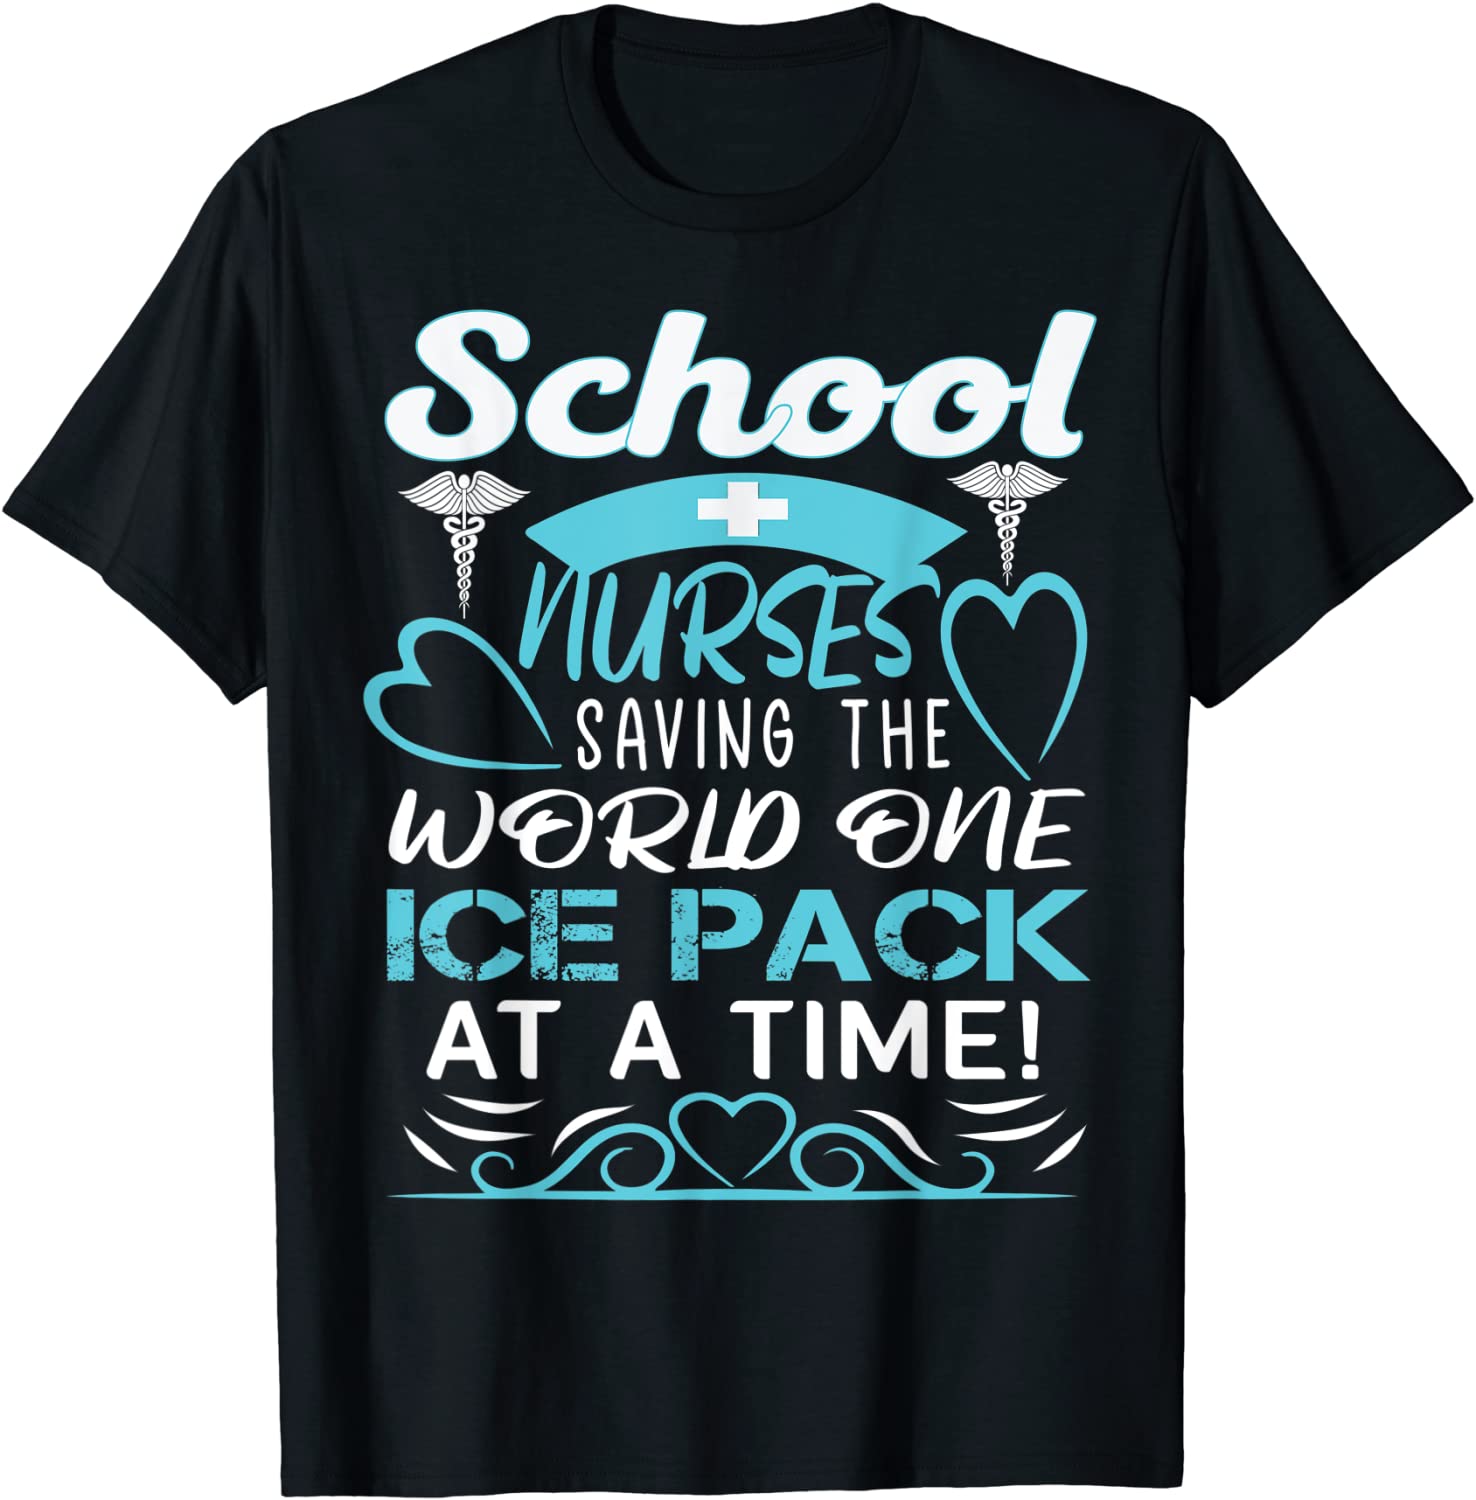 School Nurses Saving The World One Ice Pack At A Time Tee Shirt ...